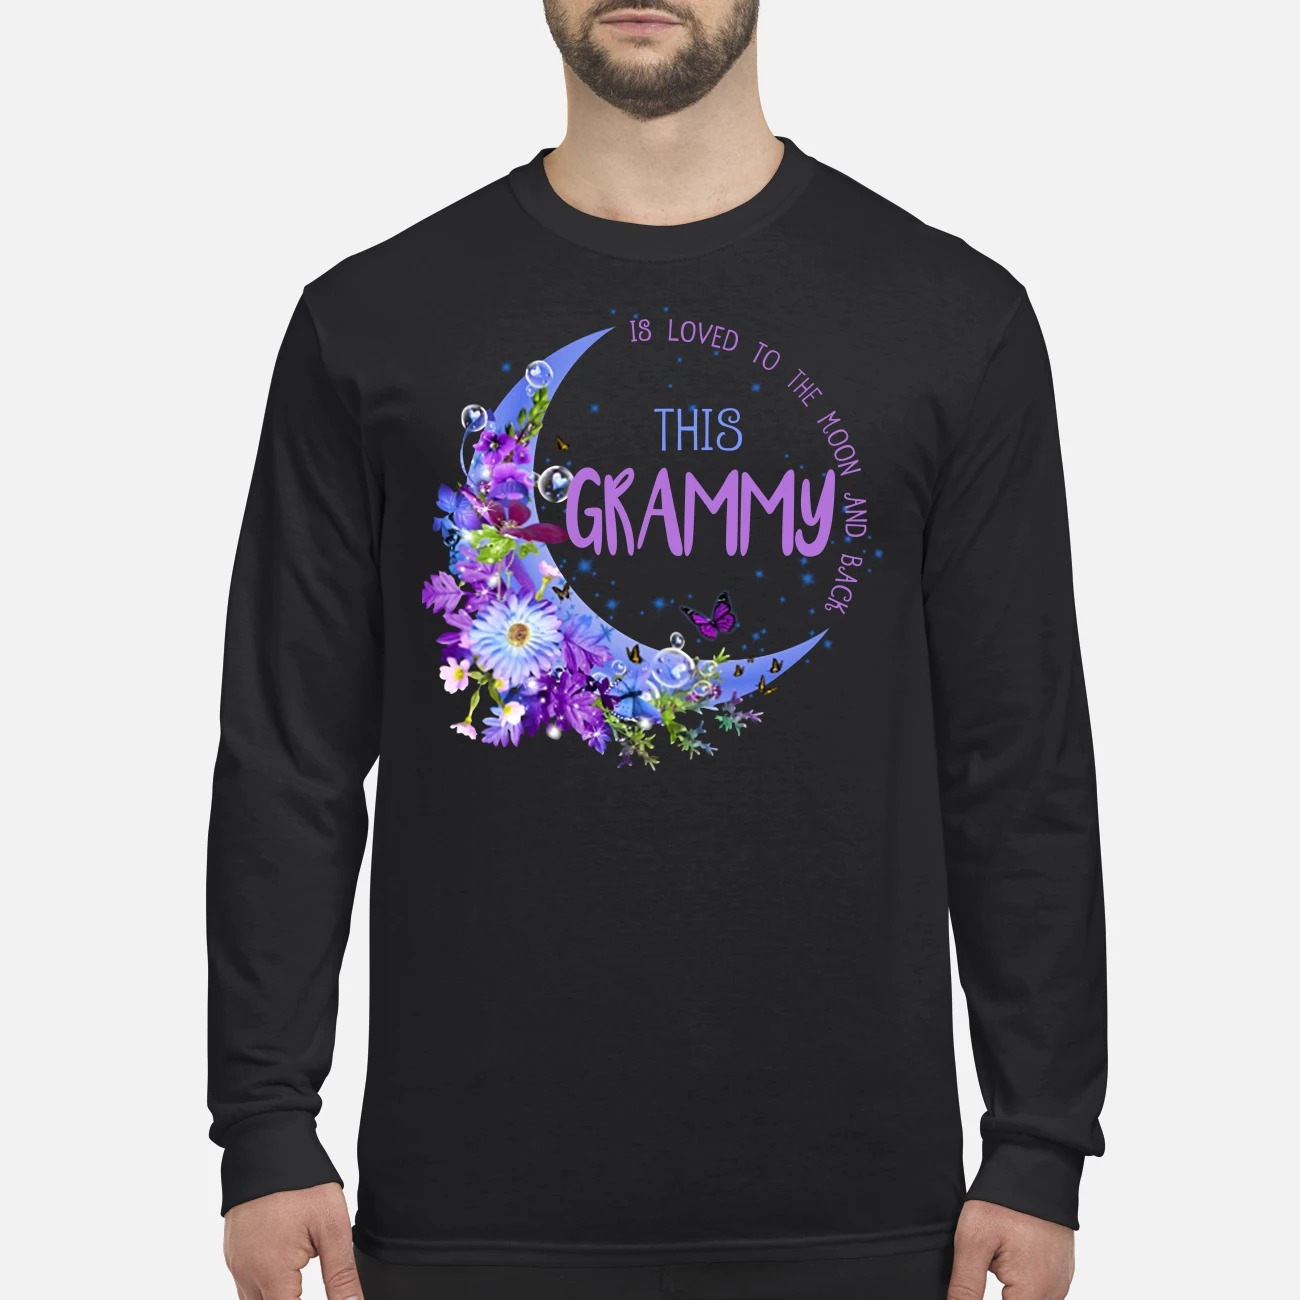 This grammy is loved to the moon and back men's long sleeved shirt